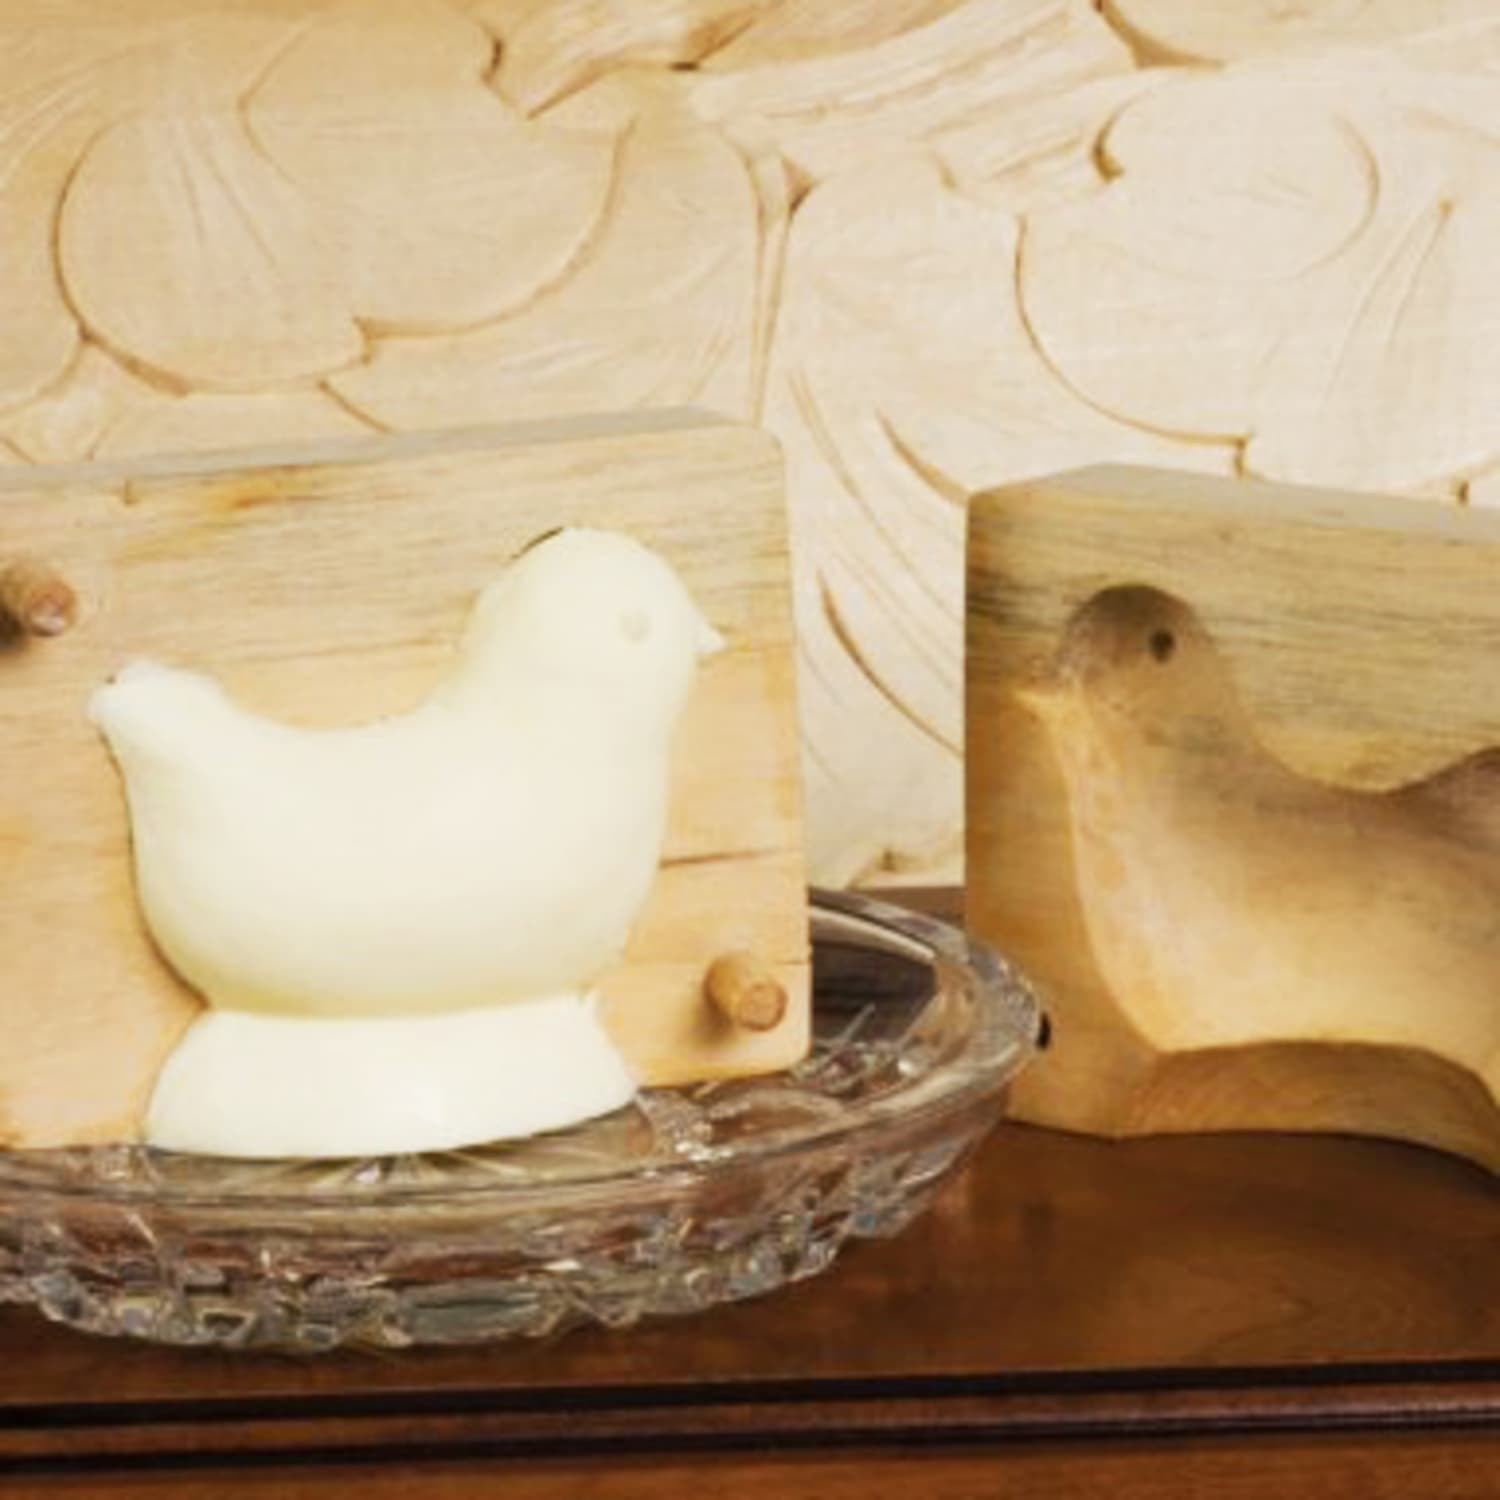 Loving: Old-Fashioned Butter Molds